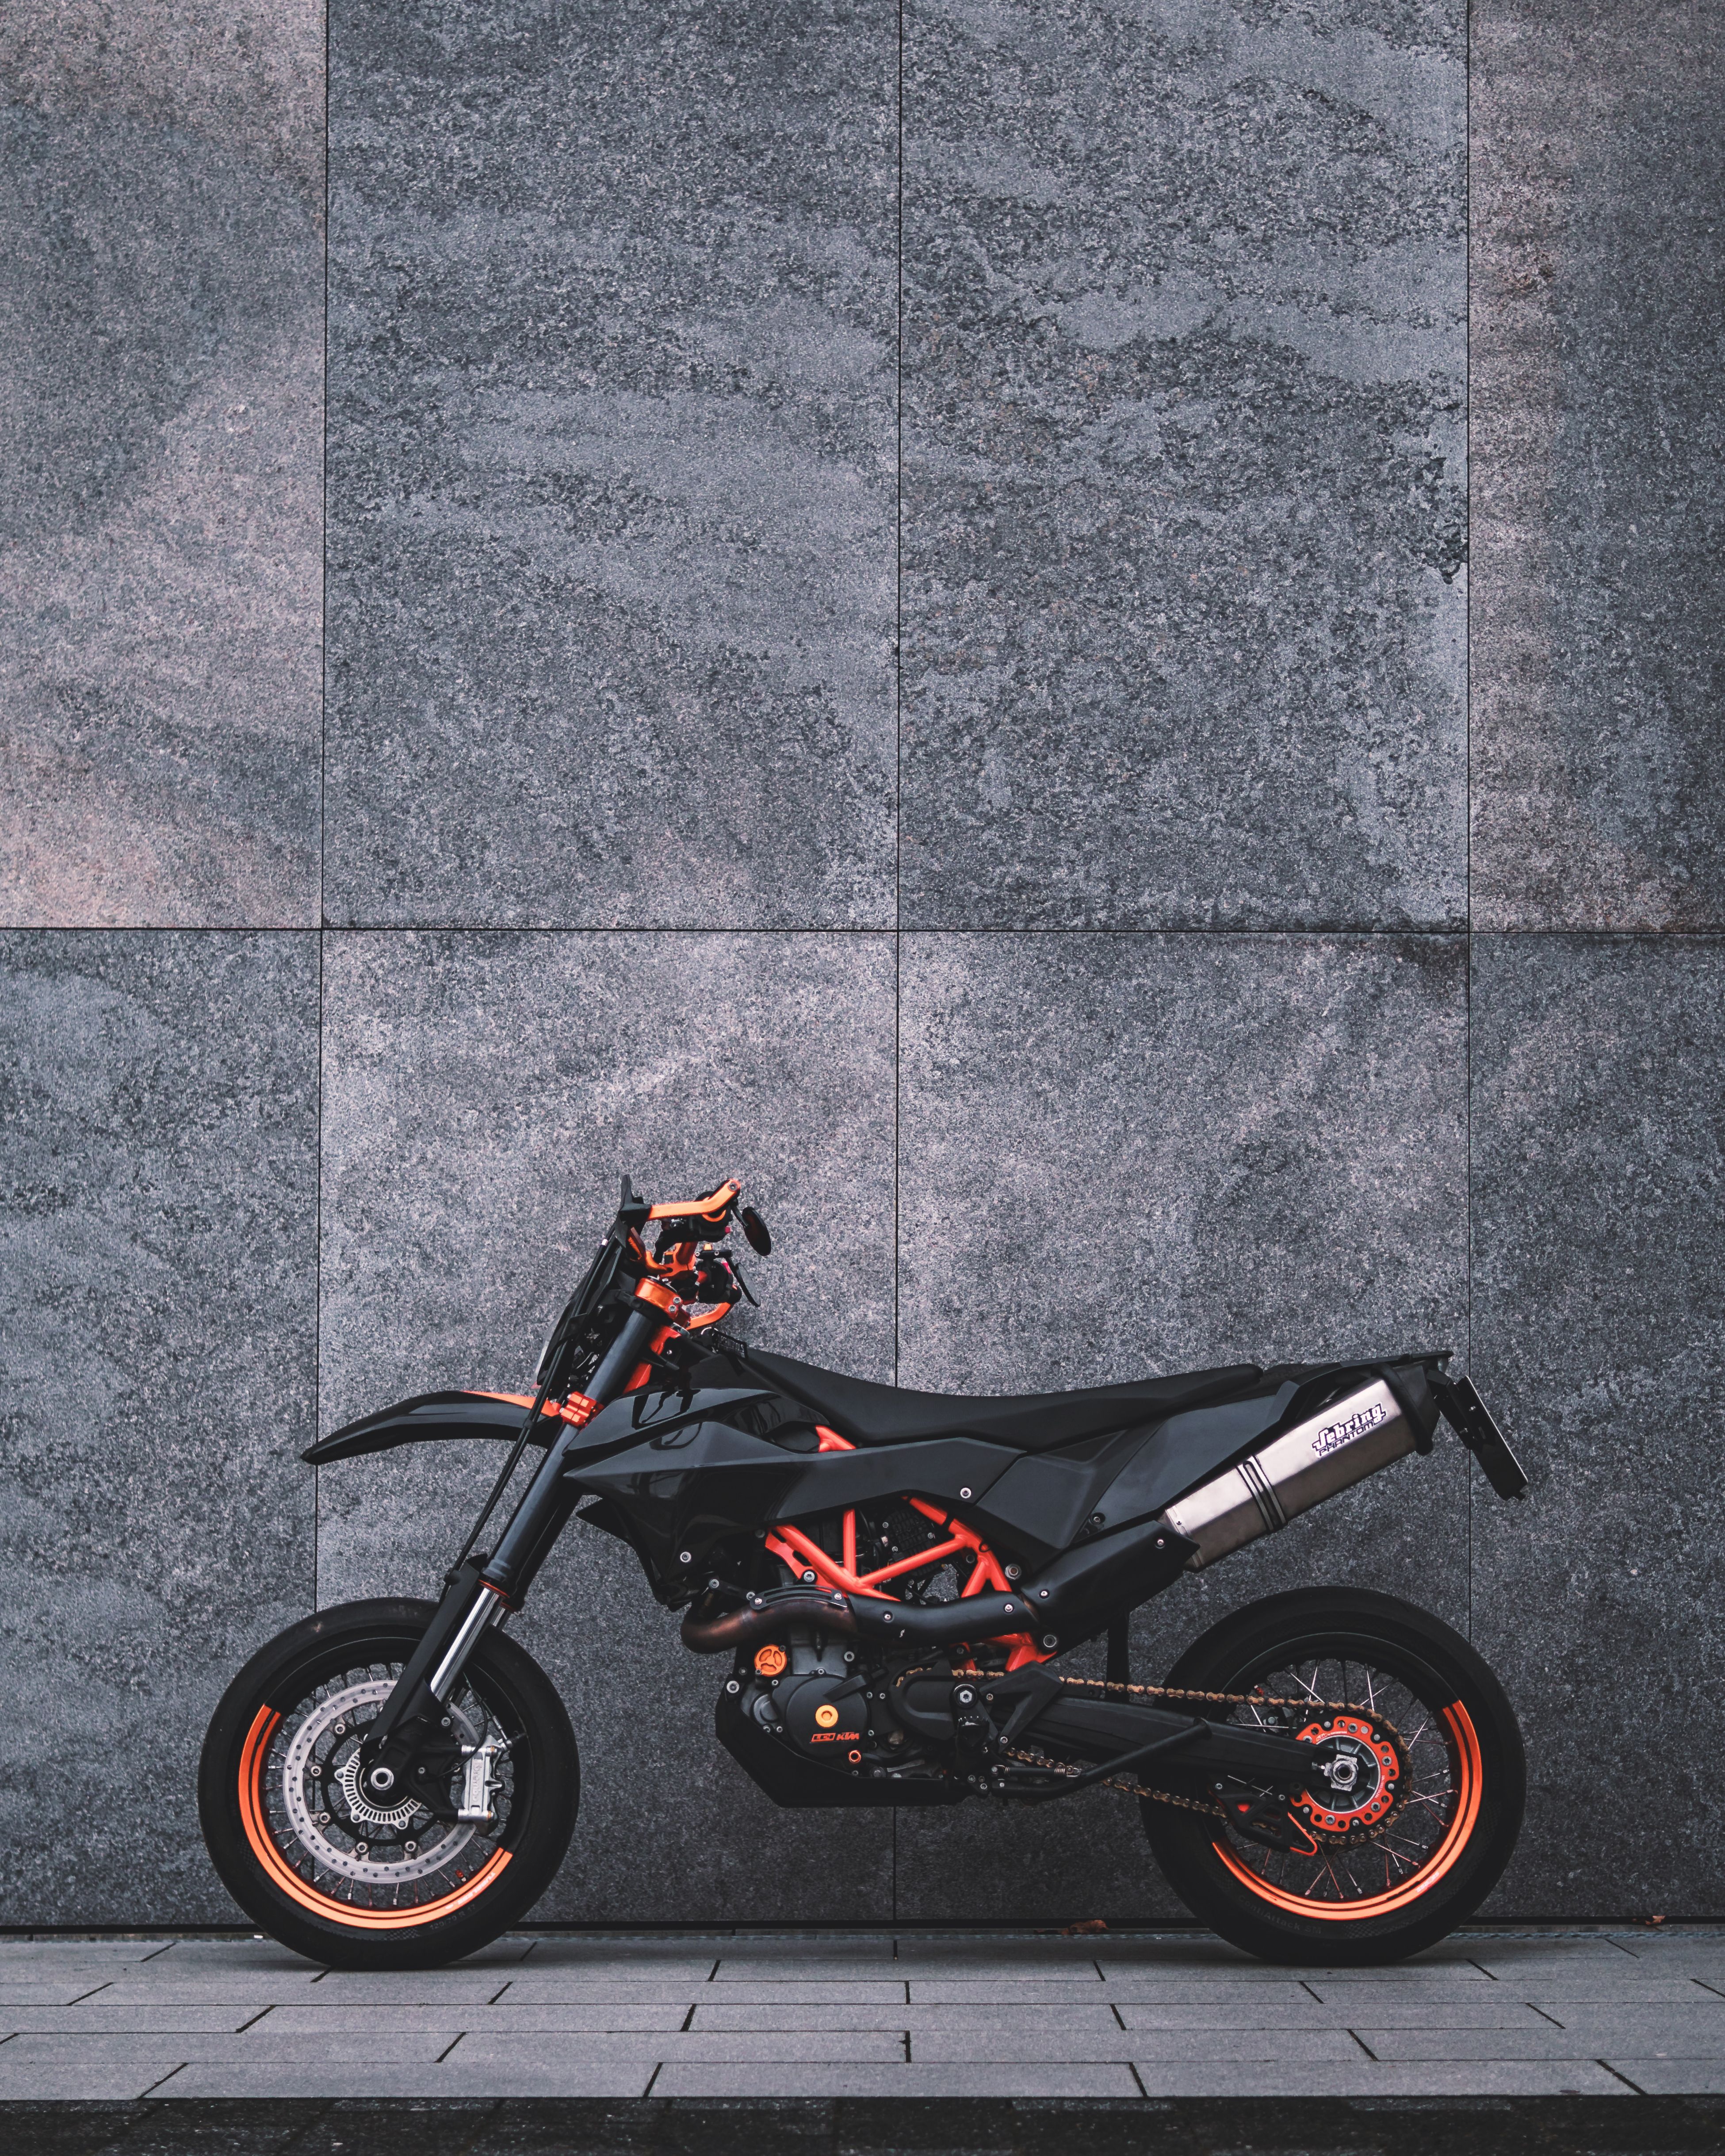 Download In Full Resolution Of Supermotard, Download